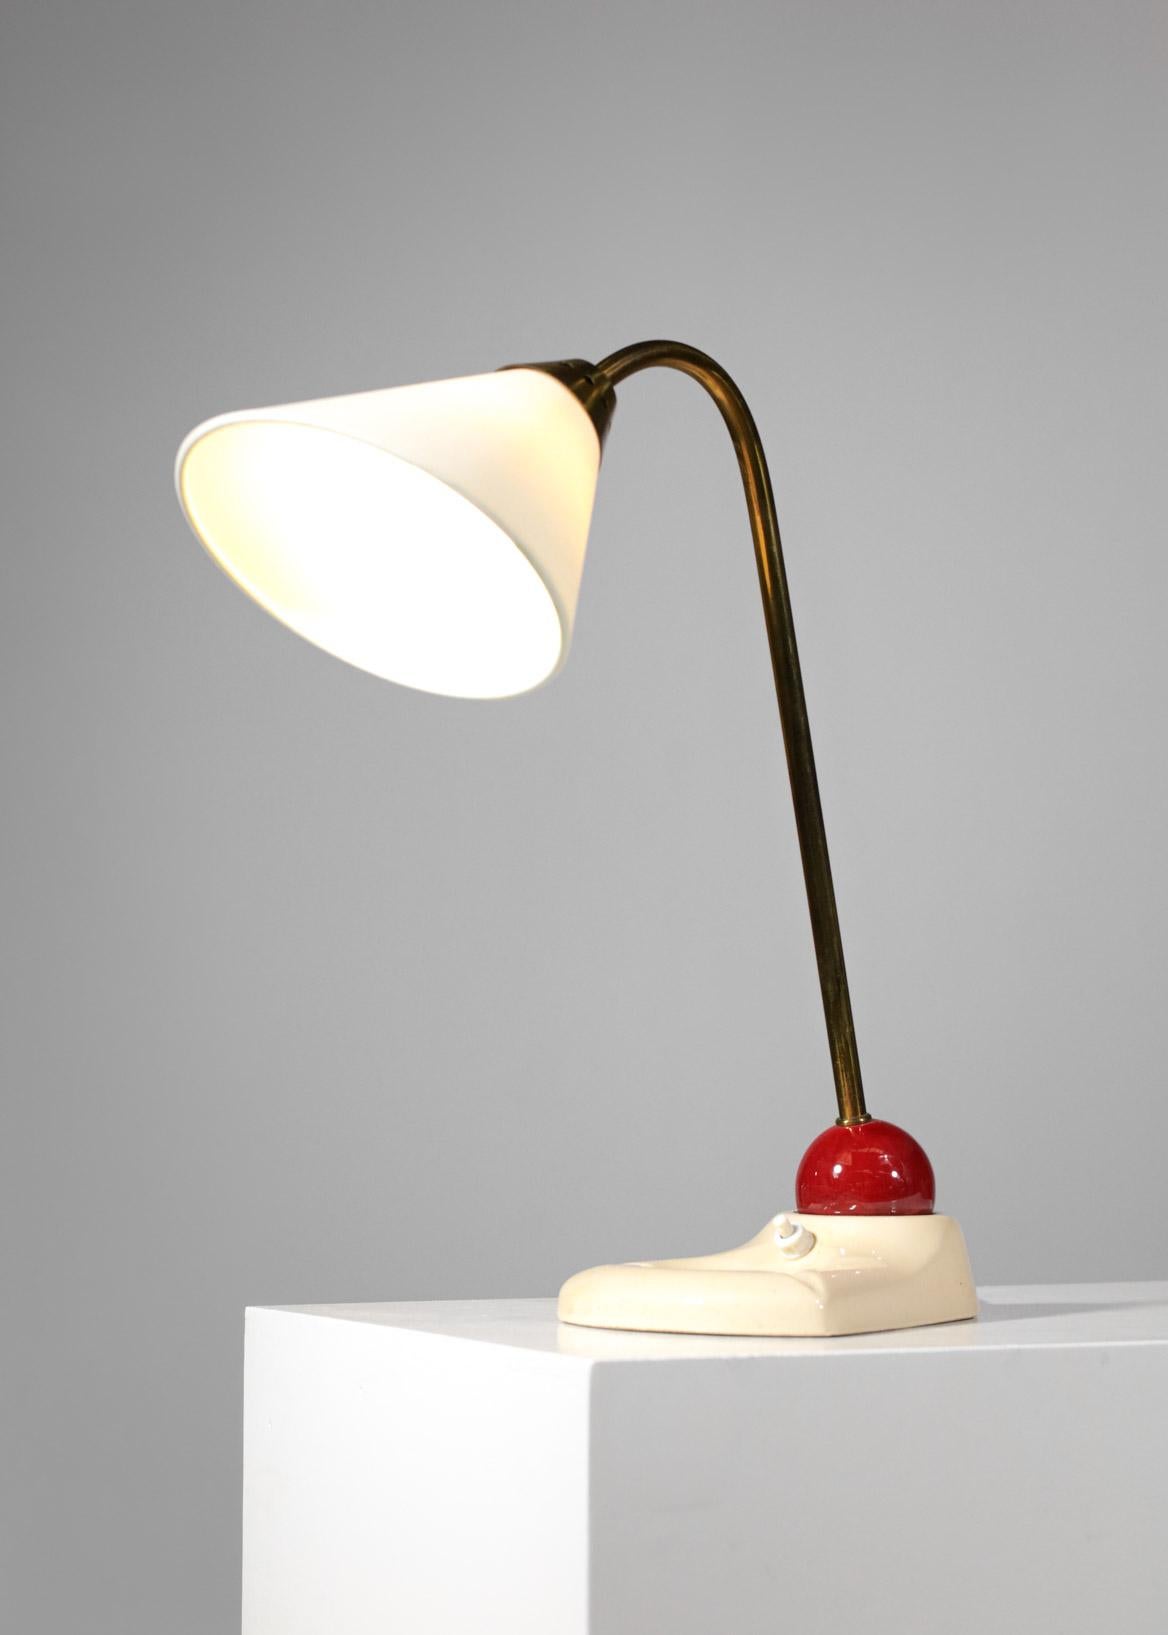 Nice French desk lamp from the 60's. Beige and red glazed ceramic base and ball, solid brass arm and fabric shade. Very nice vintage condition, nice patina on the brass (see pictures). Recommended LED bulb type B22.